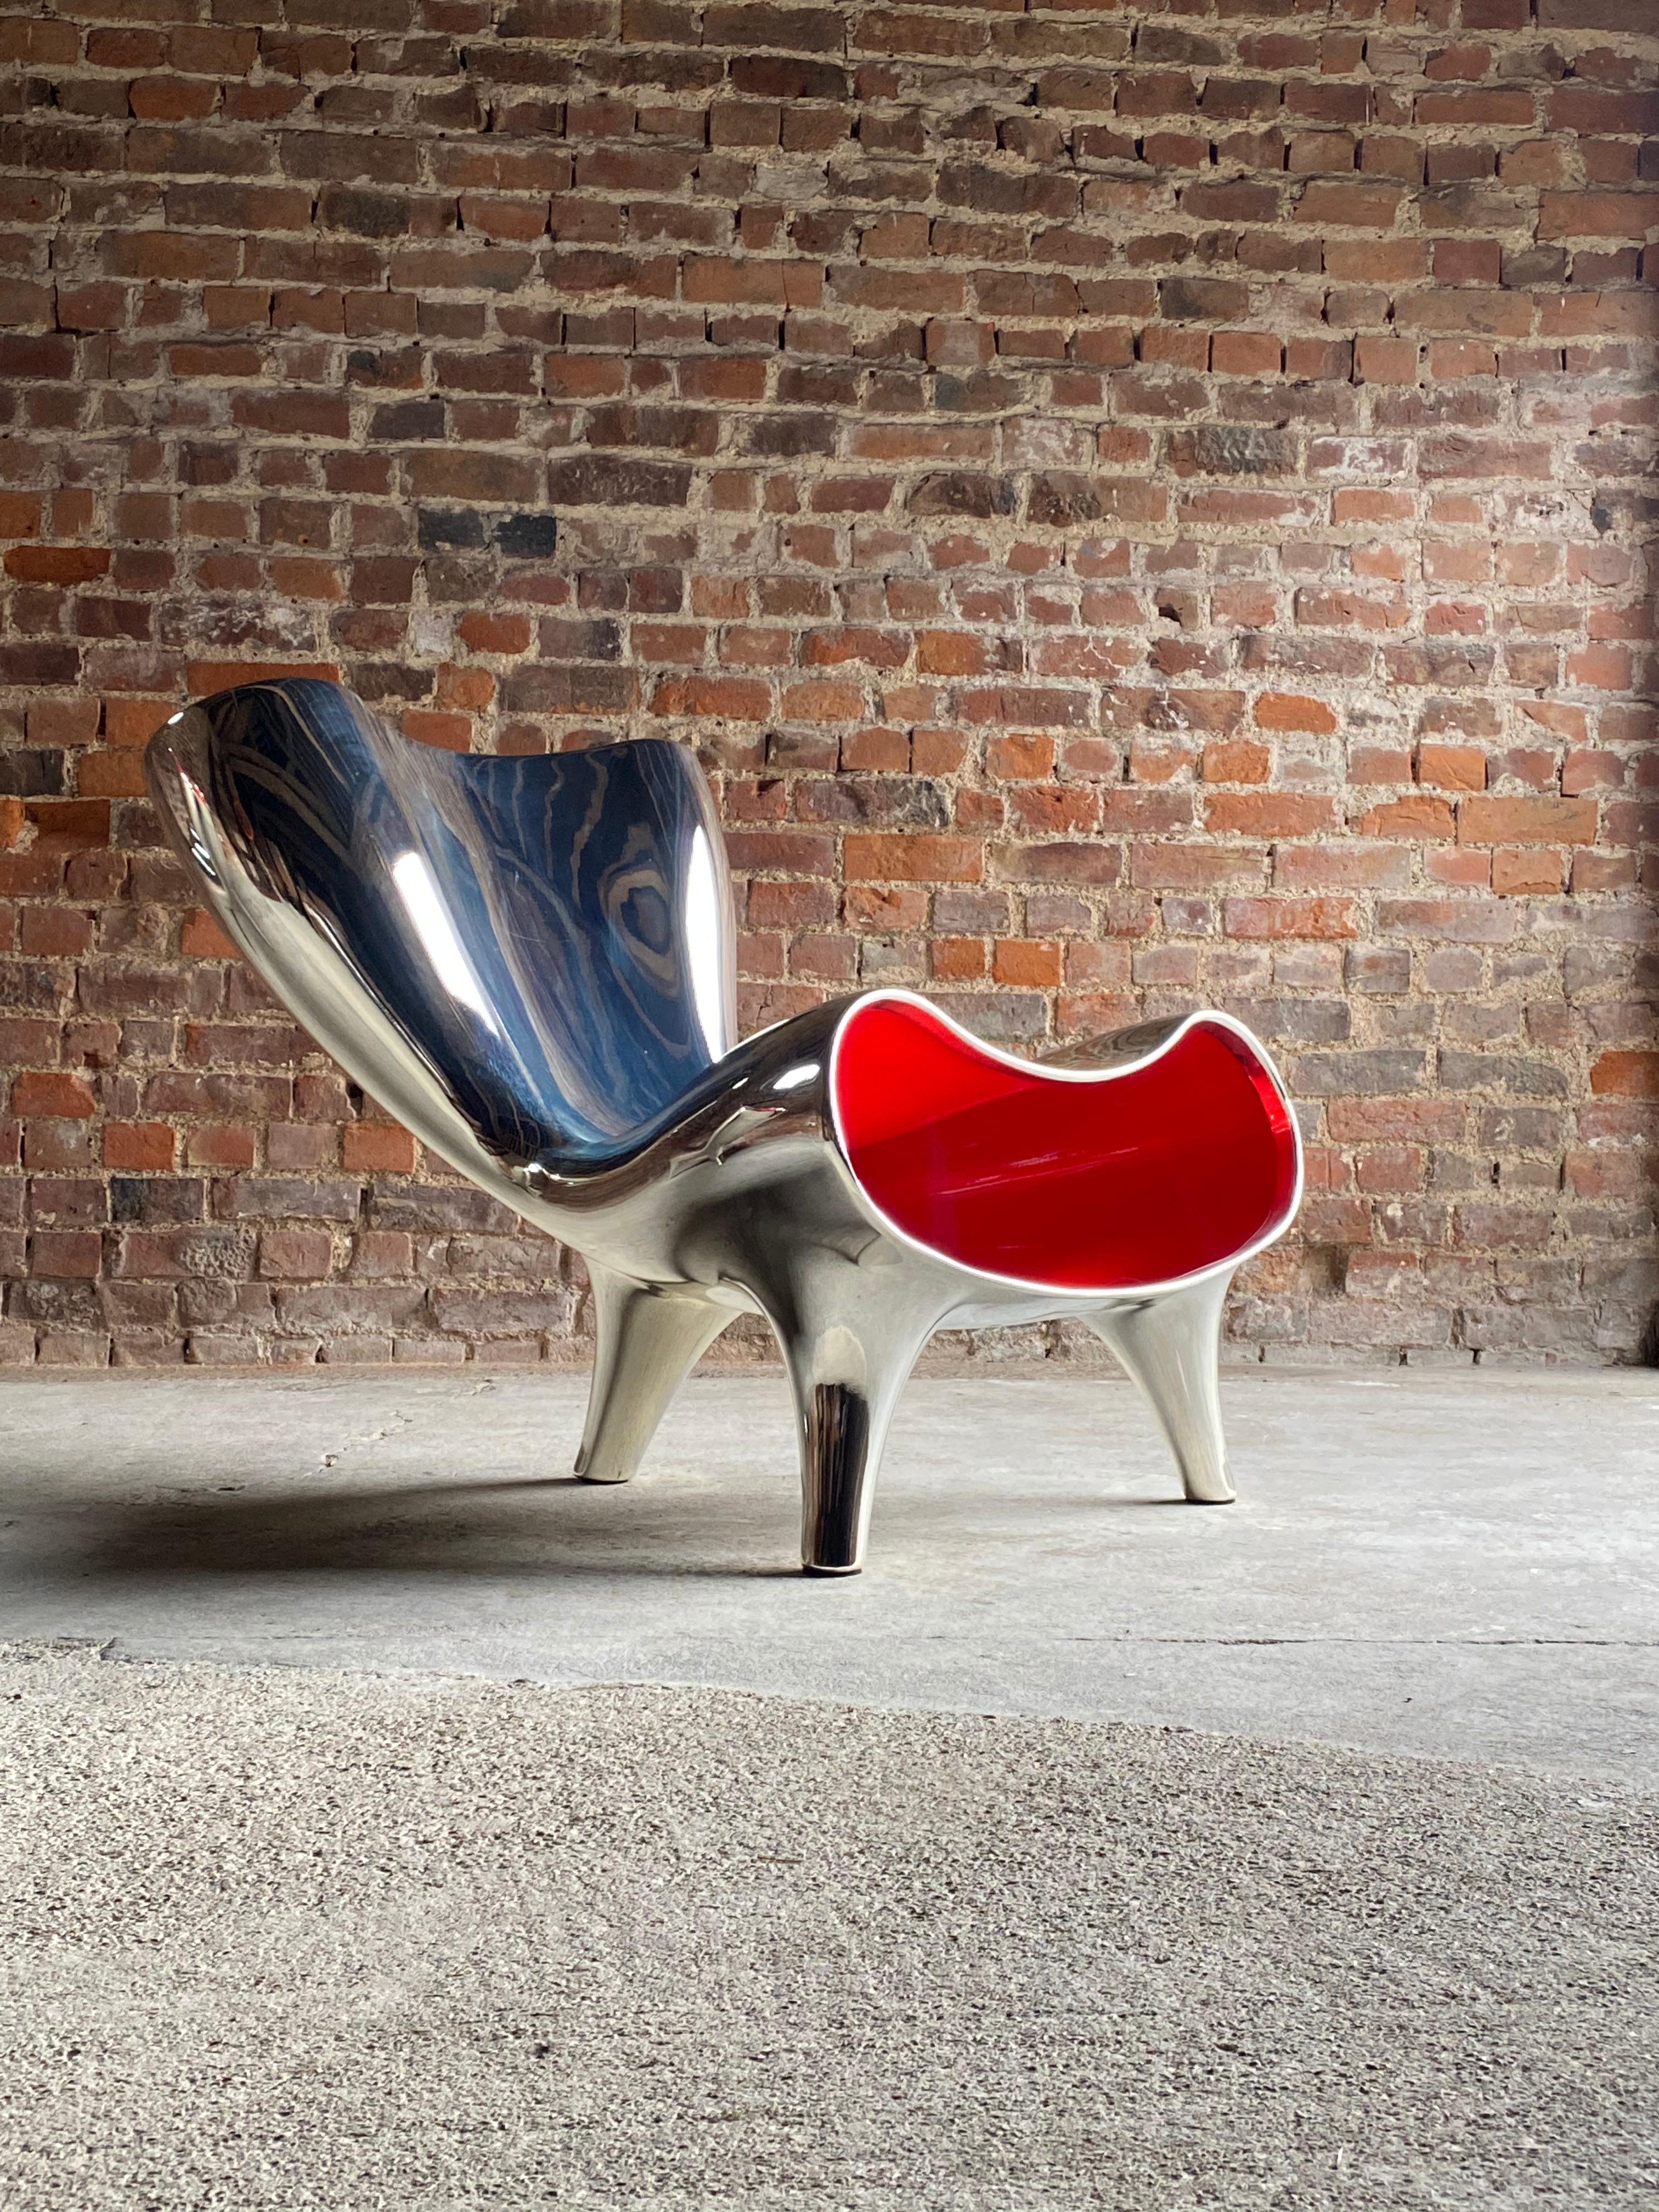 Marc Newson Lockheed design chrome Orgone chairs, circa 1993

We are delighted to offer a unique opportunity to purchase a rare pair of Chrome finish Orgone chairs after the original Lockheed design by Marc Newson circa 1993 finished in chrome